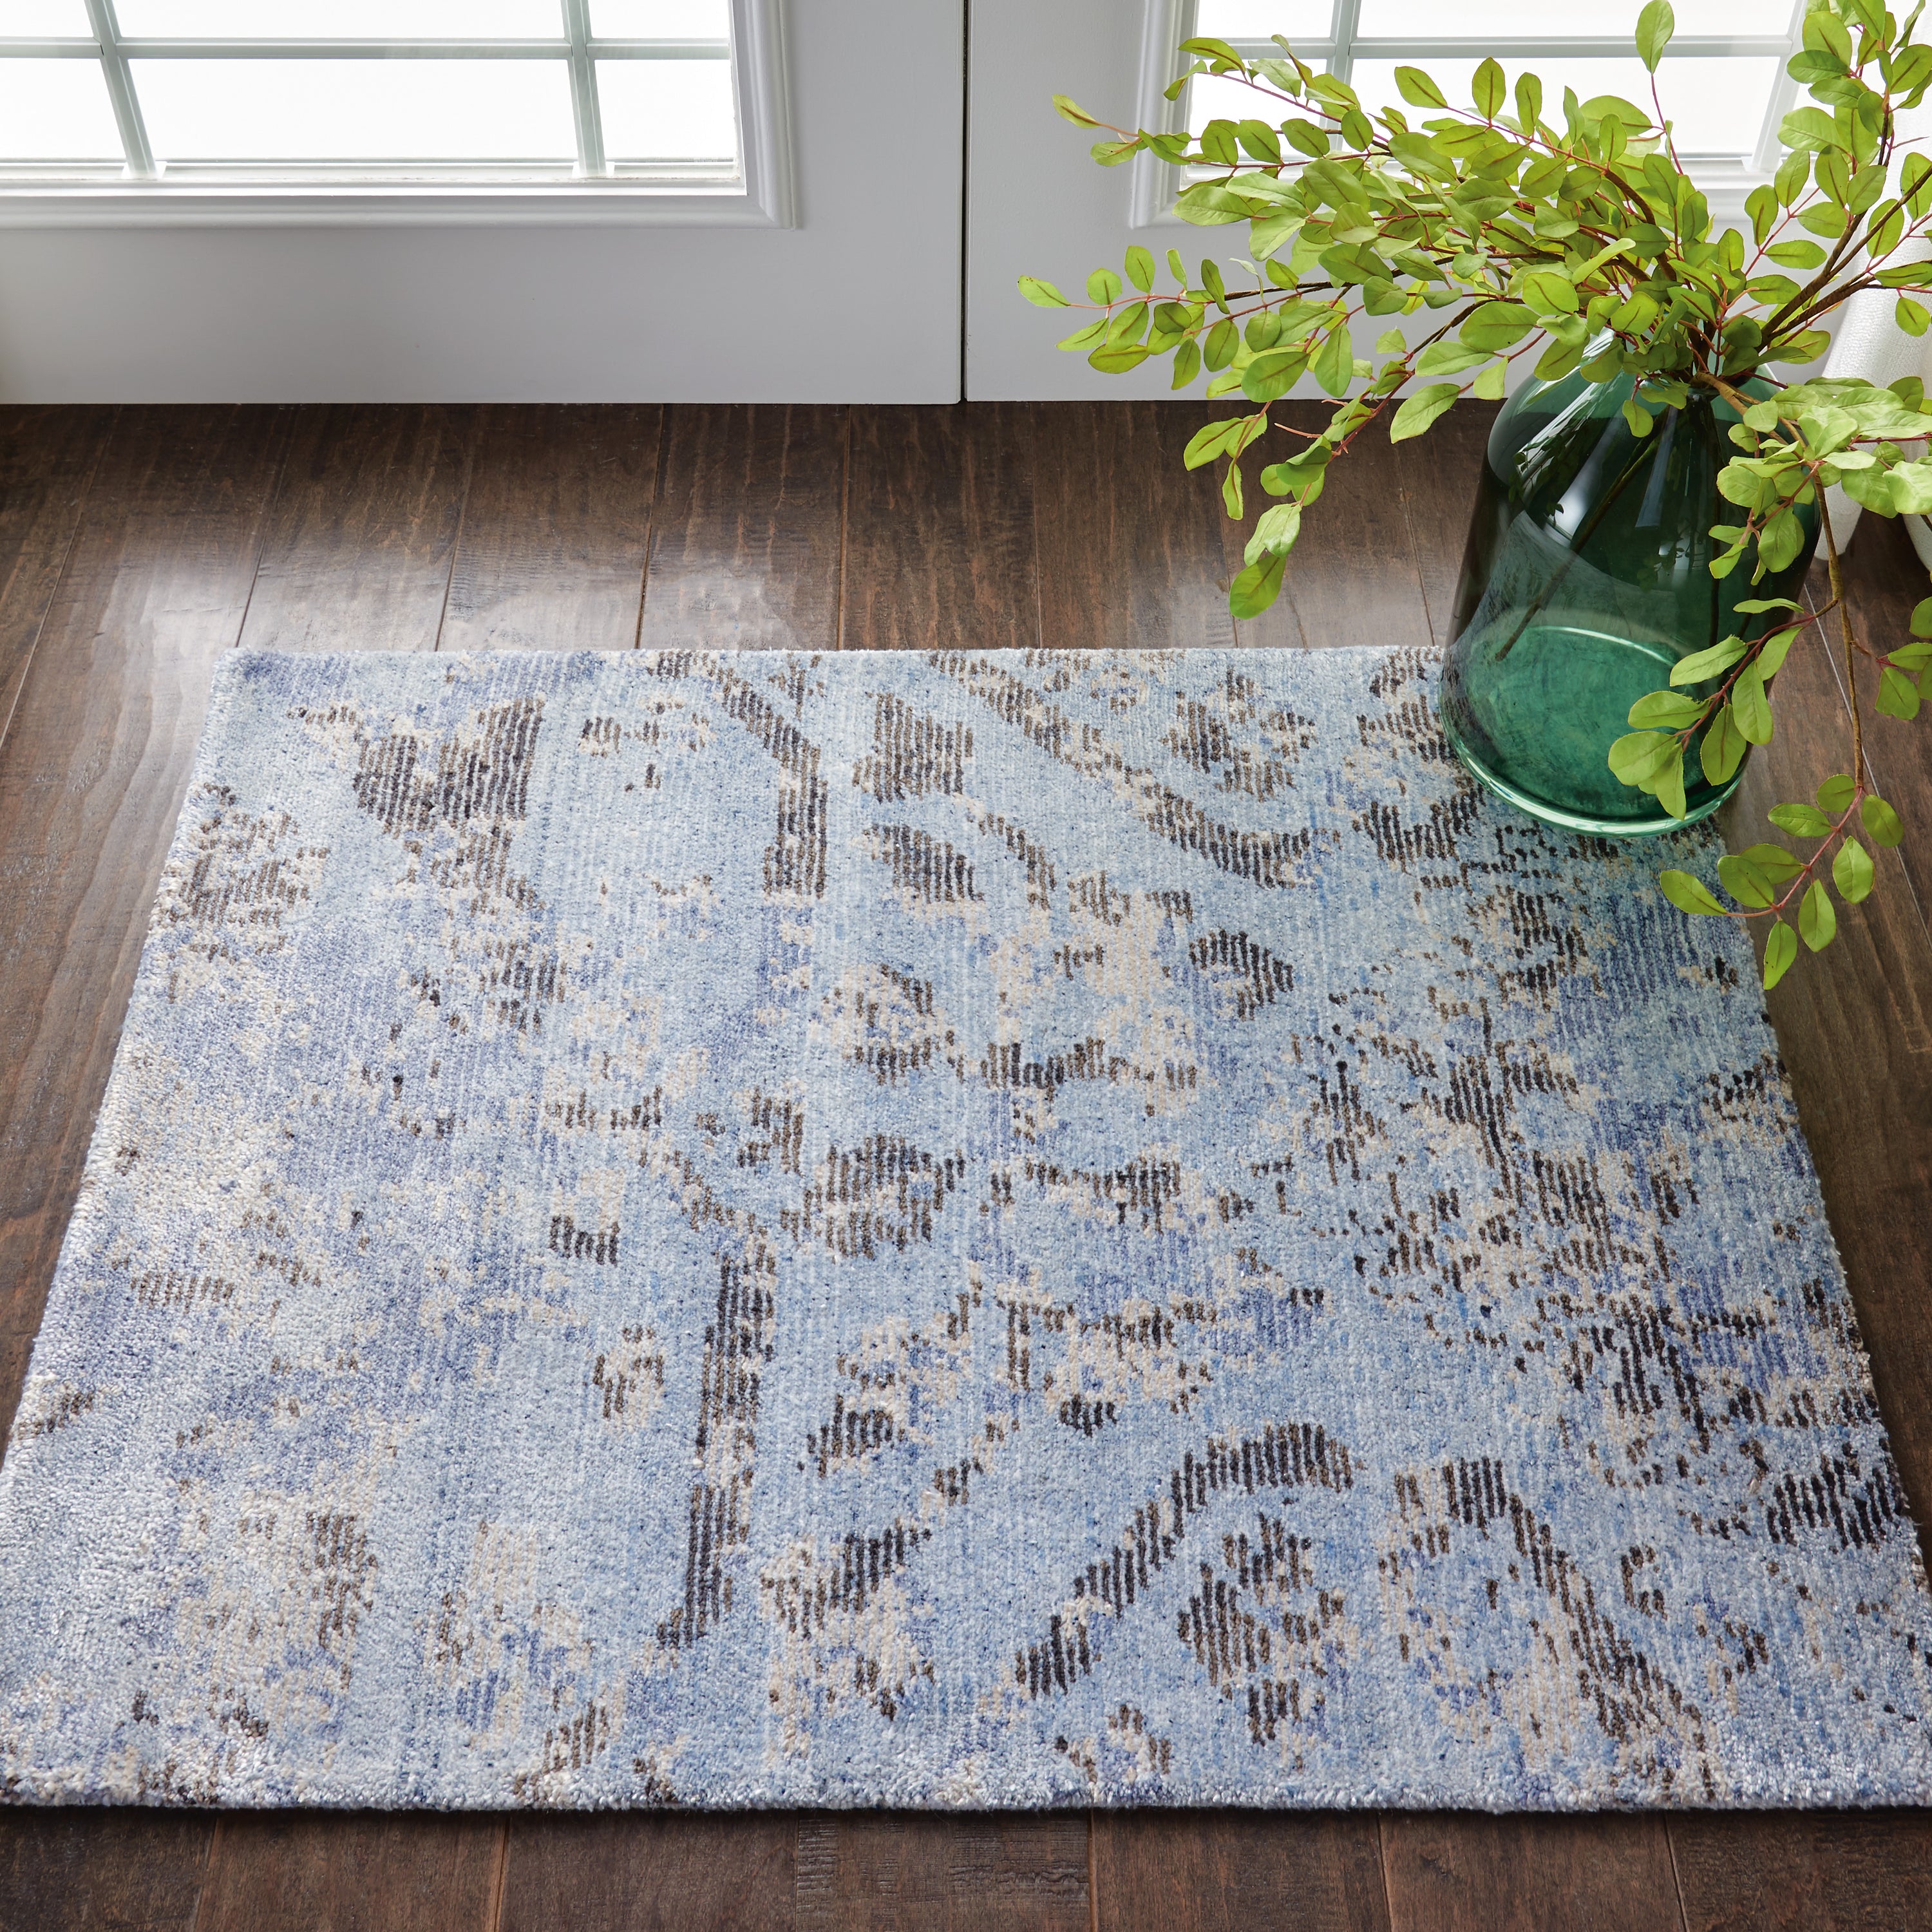 Contemporary blue patterned rug and decorative vase create cozy ambiance